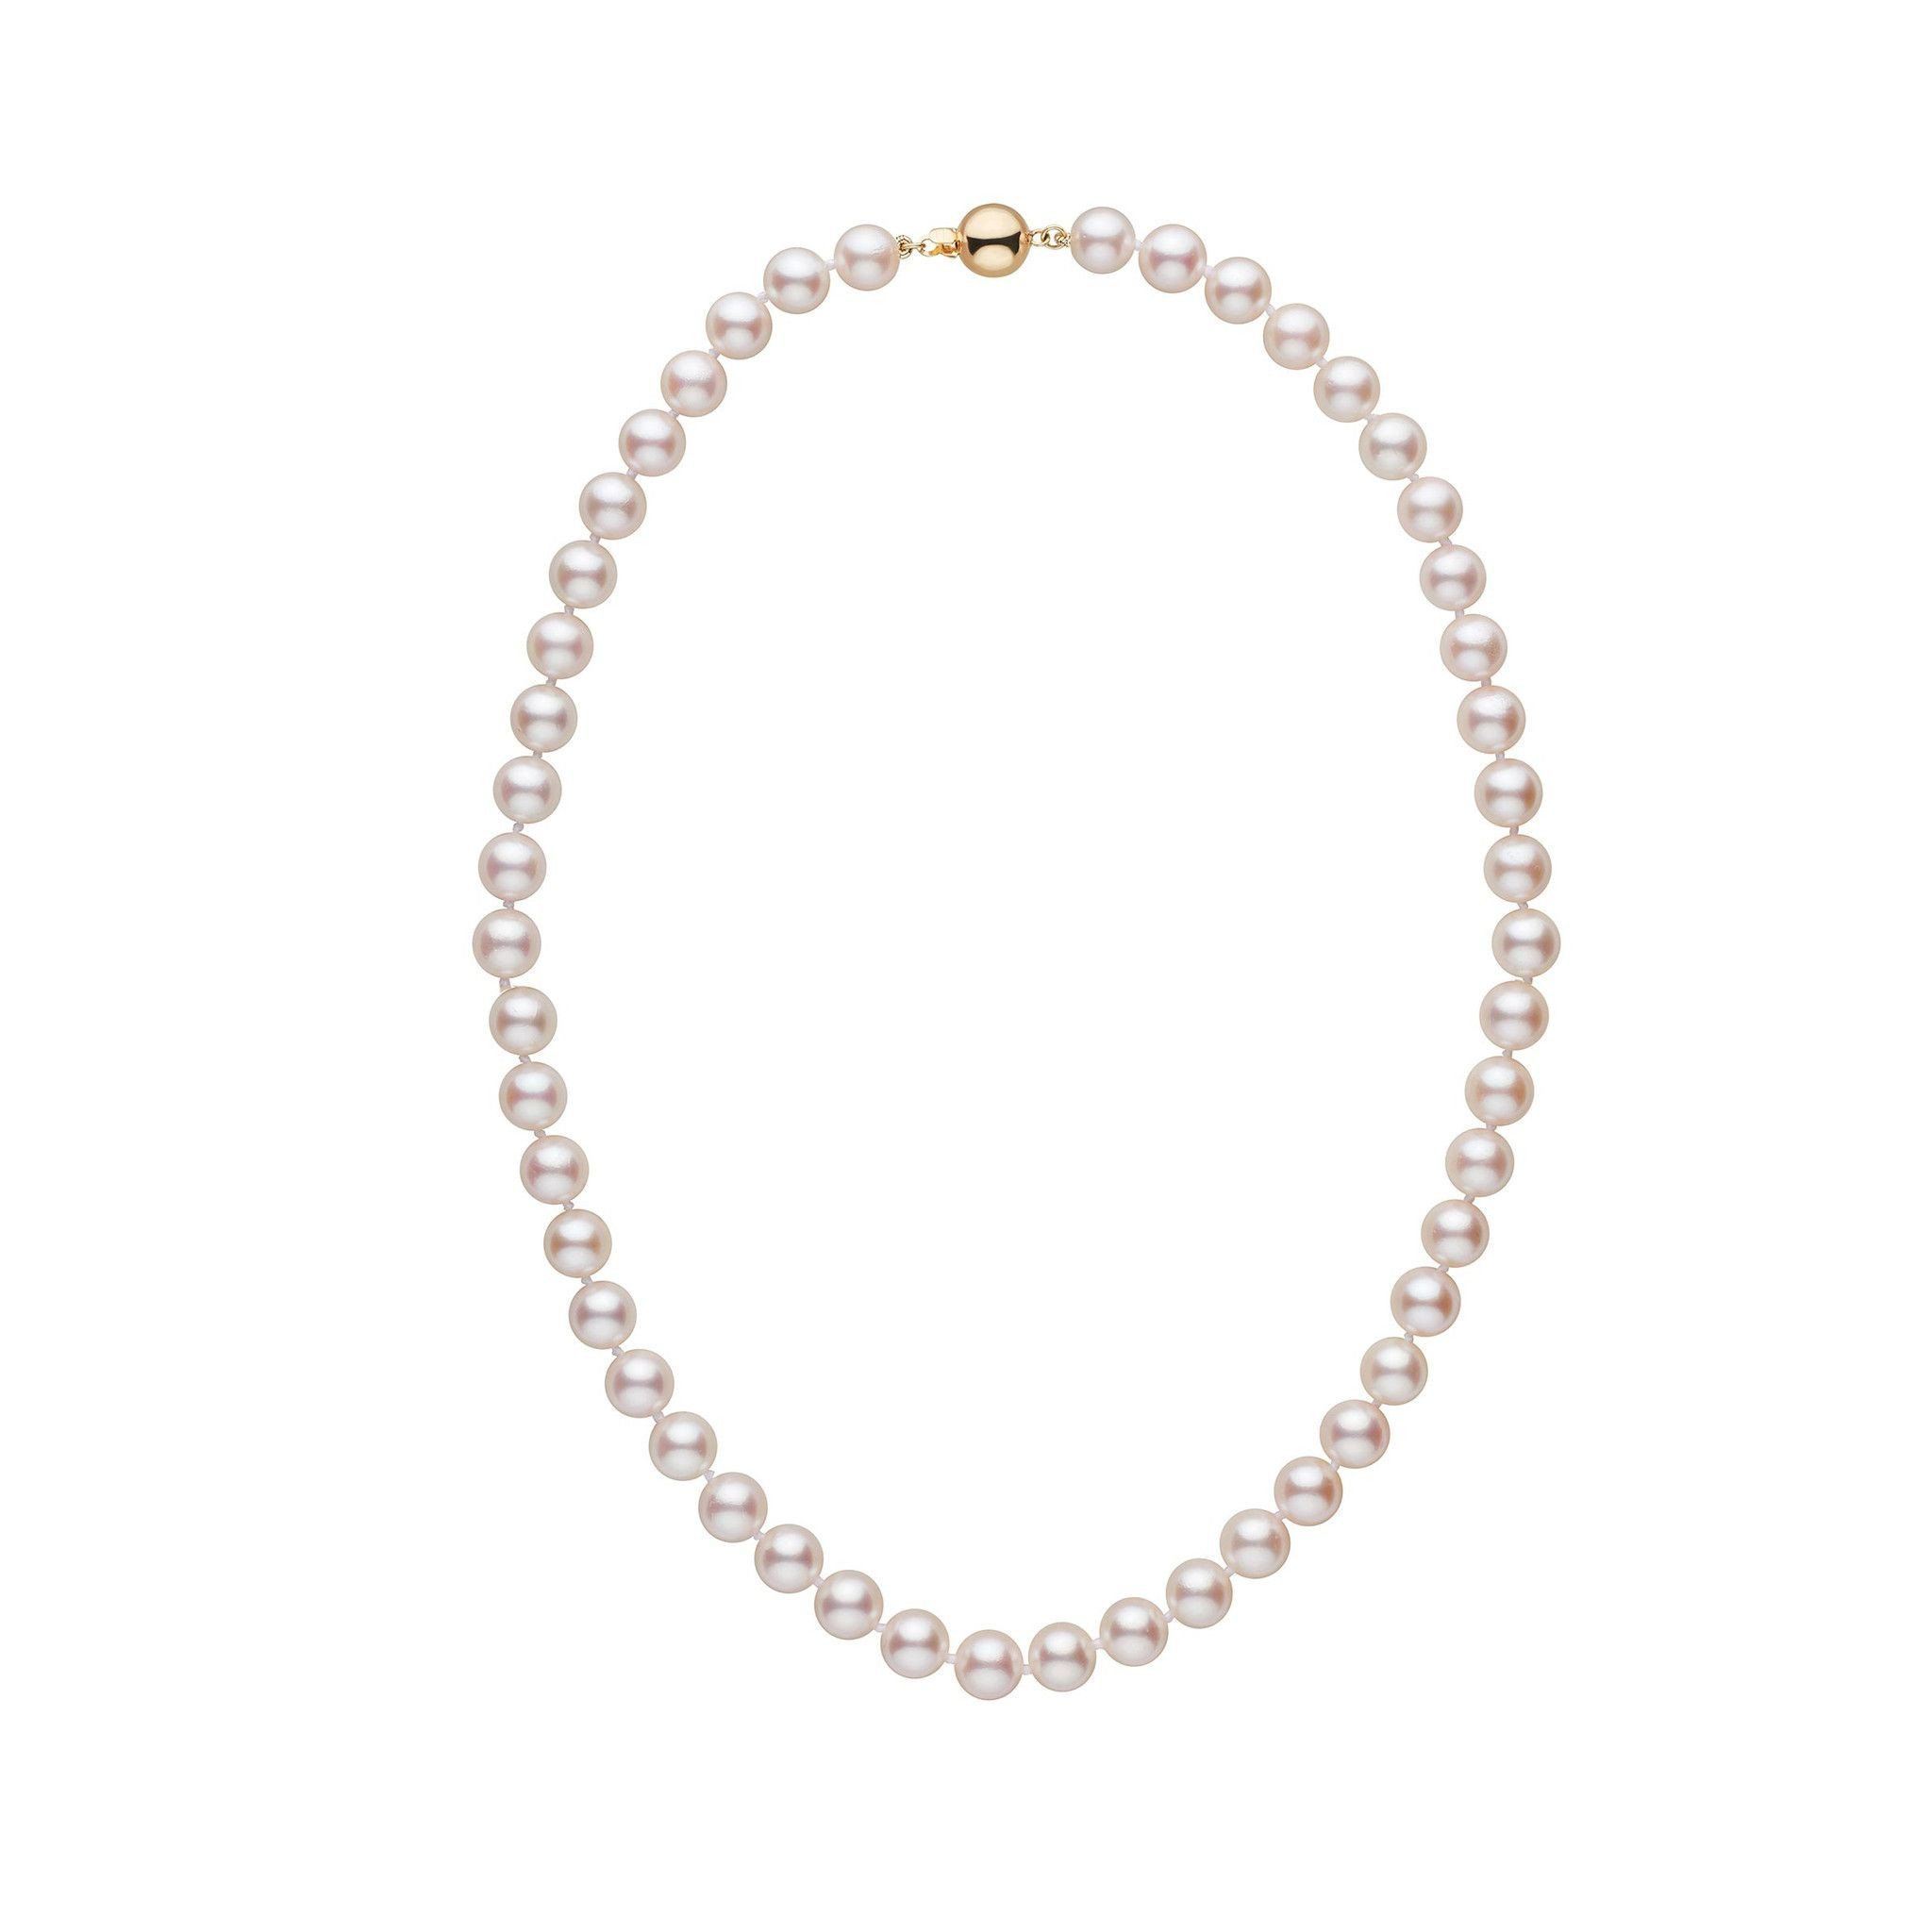 7.5-8.0 mm 16 inch AA+ White Akoya Pearl Necklace Yellow Gold